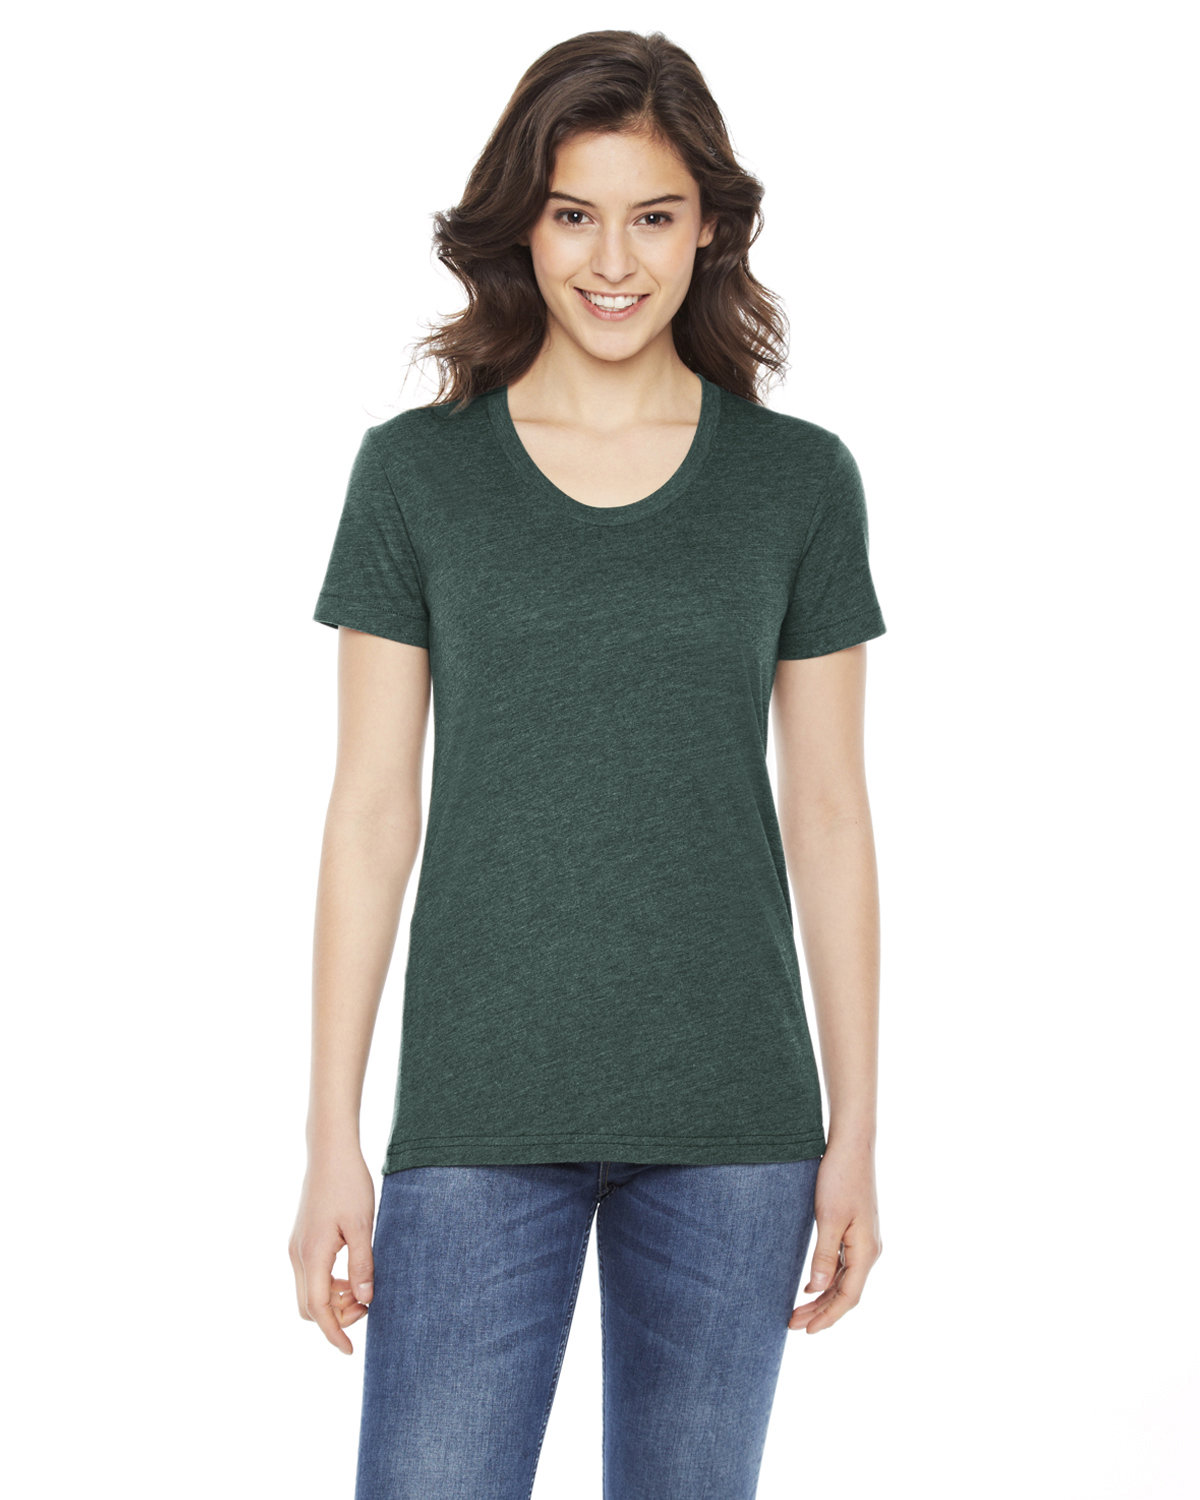 American Apparel Ladies' Poly-Cotton Short-Sleeve Crewneck HEATHER FOREST 